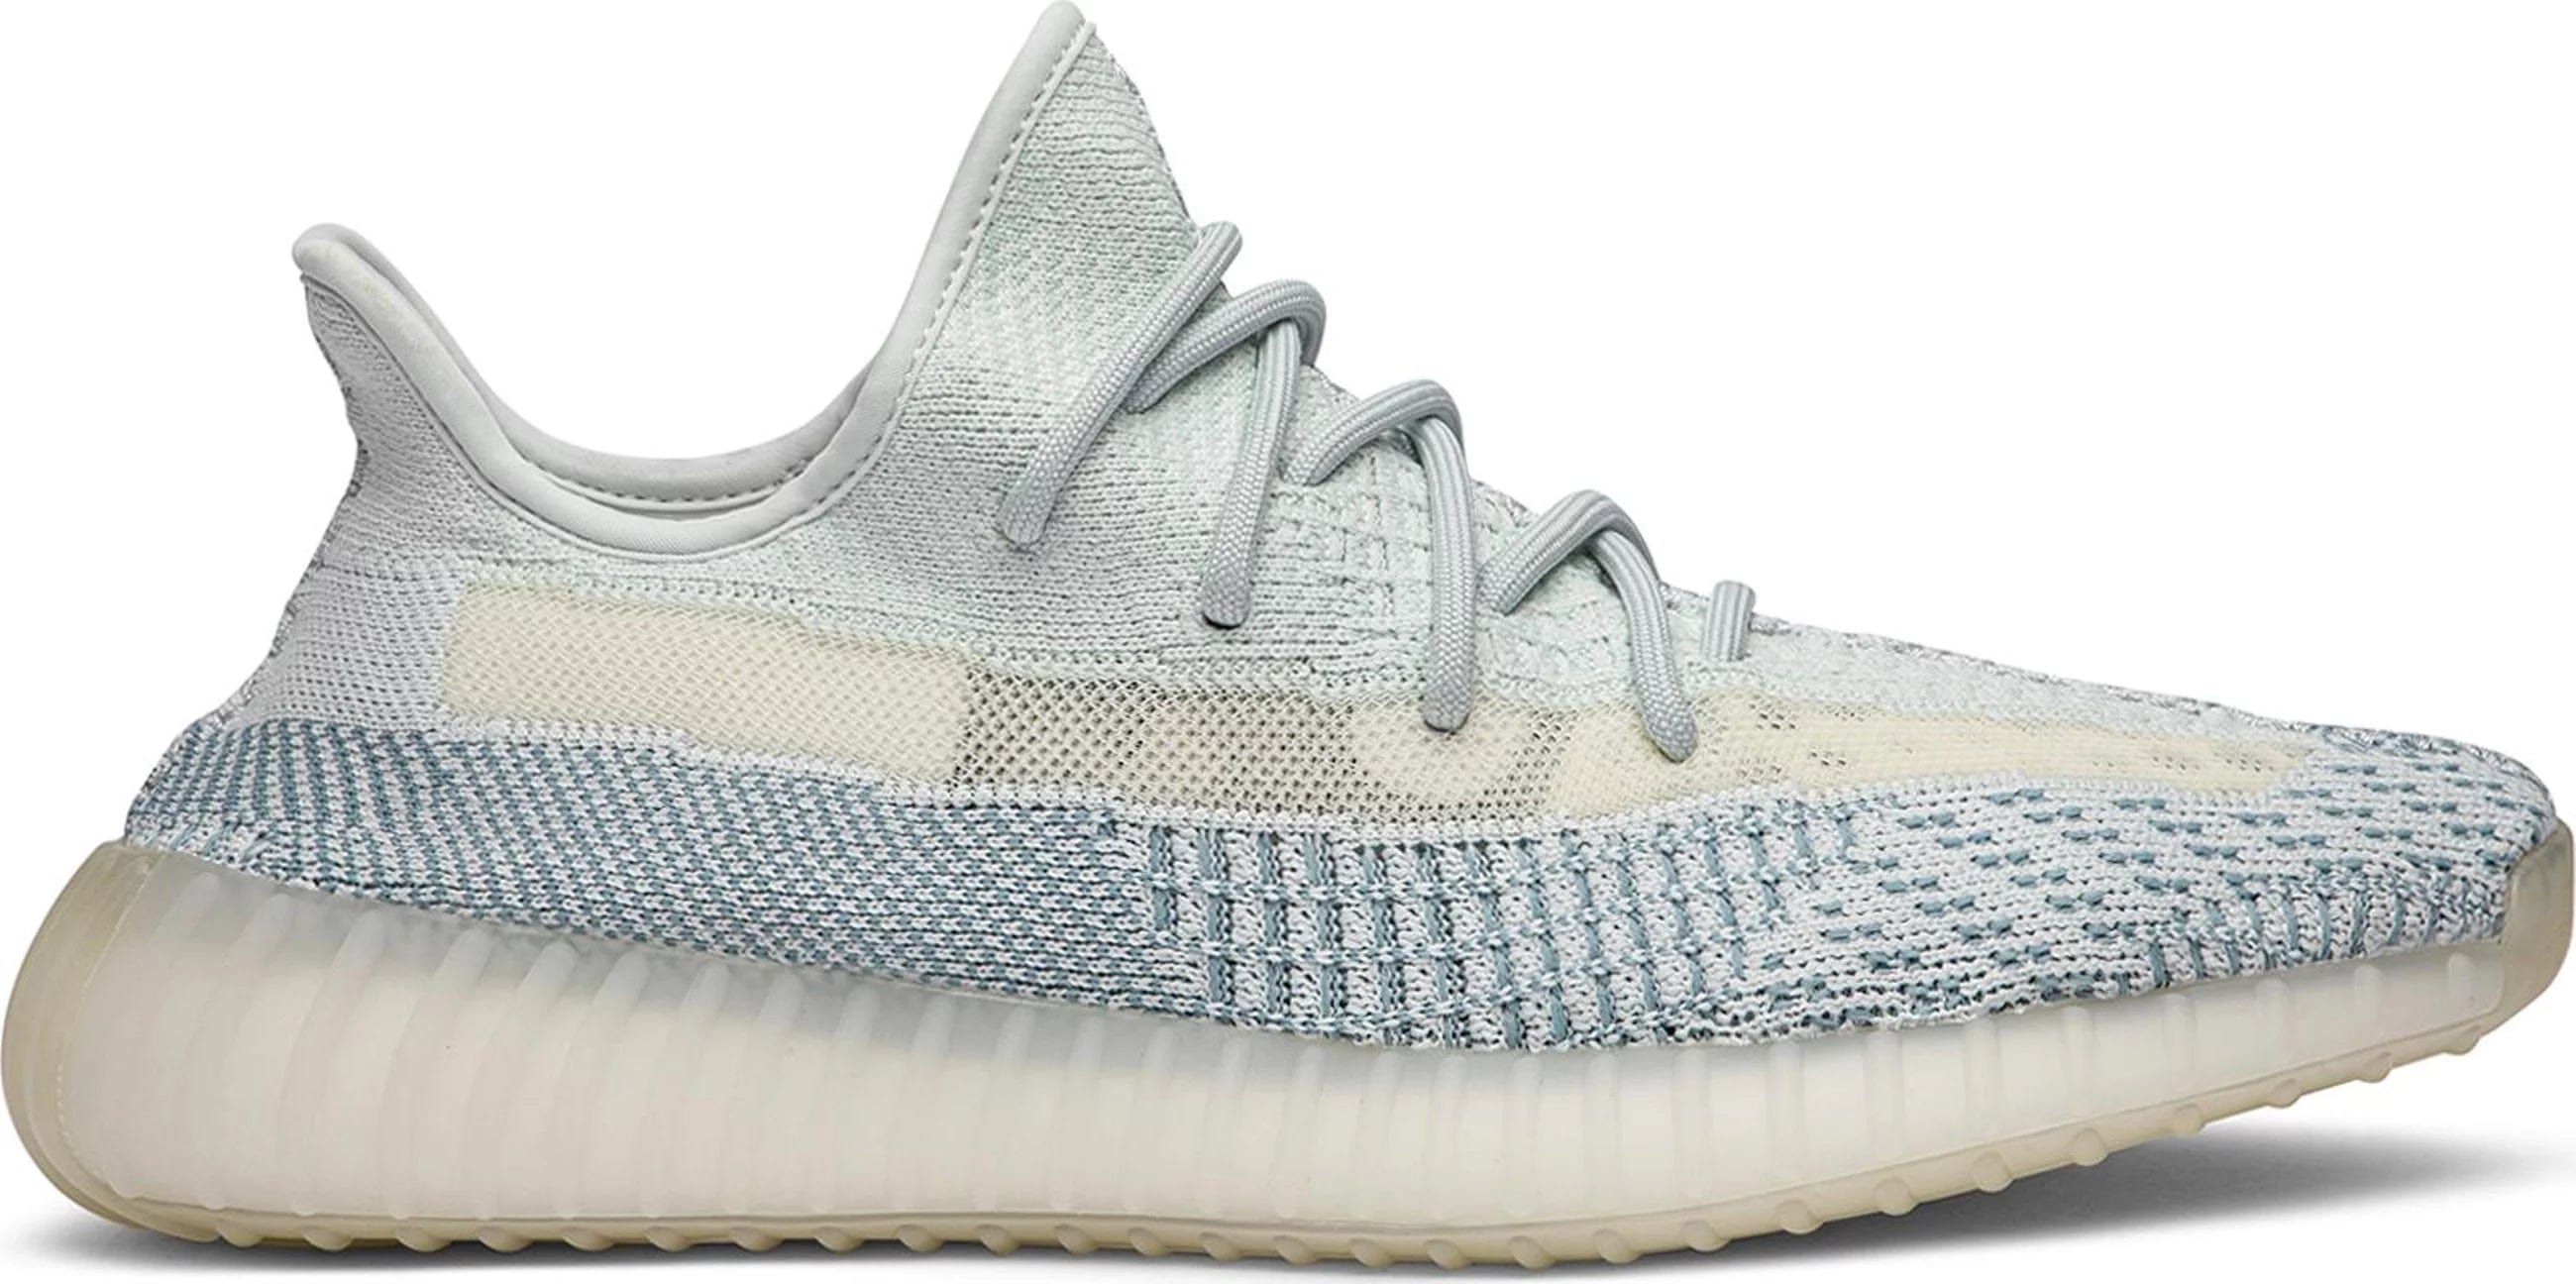 sneakers Adidas Yeezy Boost 350 V2 Cloud White Non-Reflective